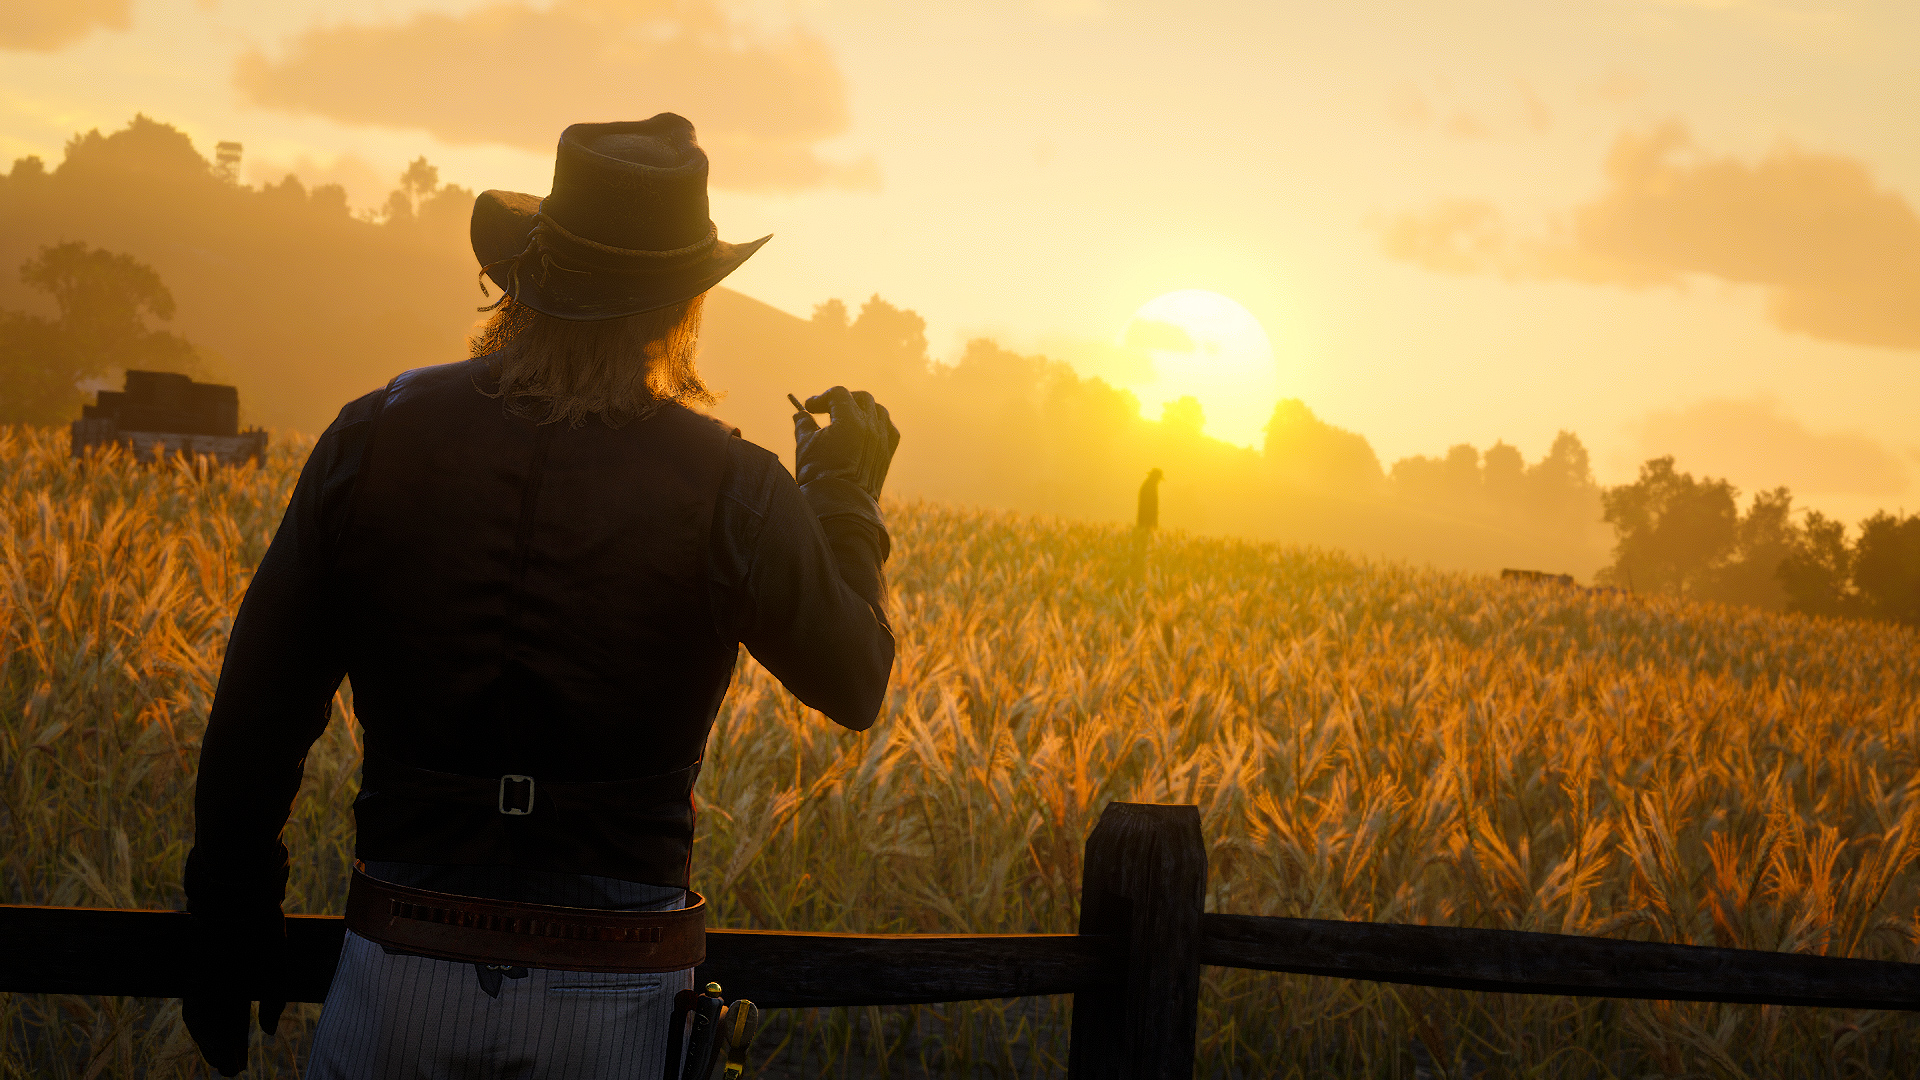 Red Dead Redemption 2 Daylight Sunset Video Games Cornfield Smoking Hat Sky Game Western Arthur Morg 1920x1080